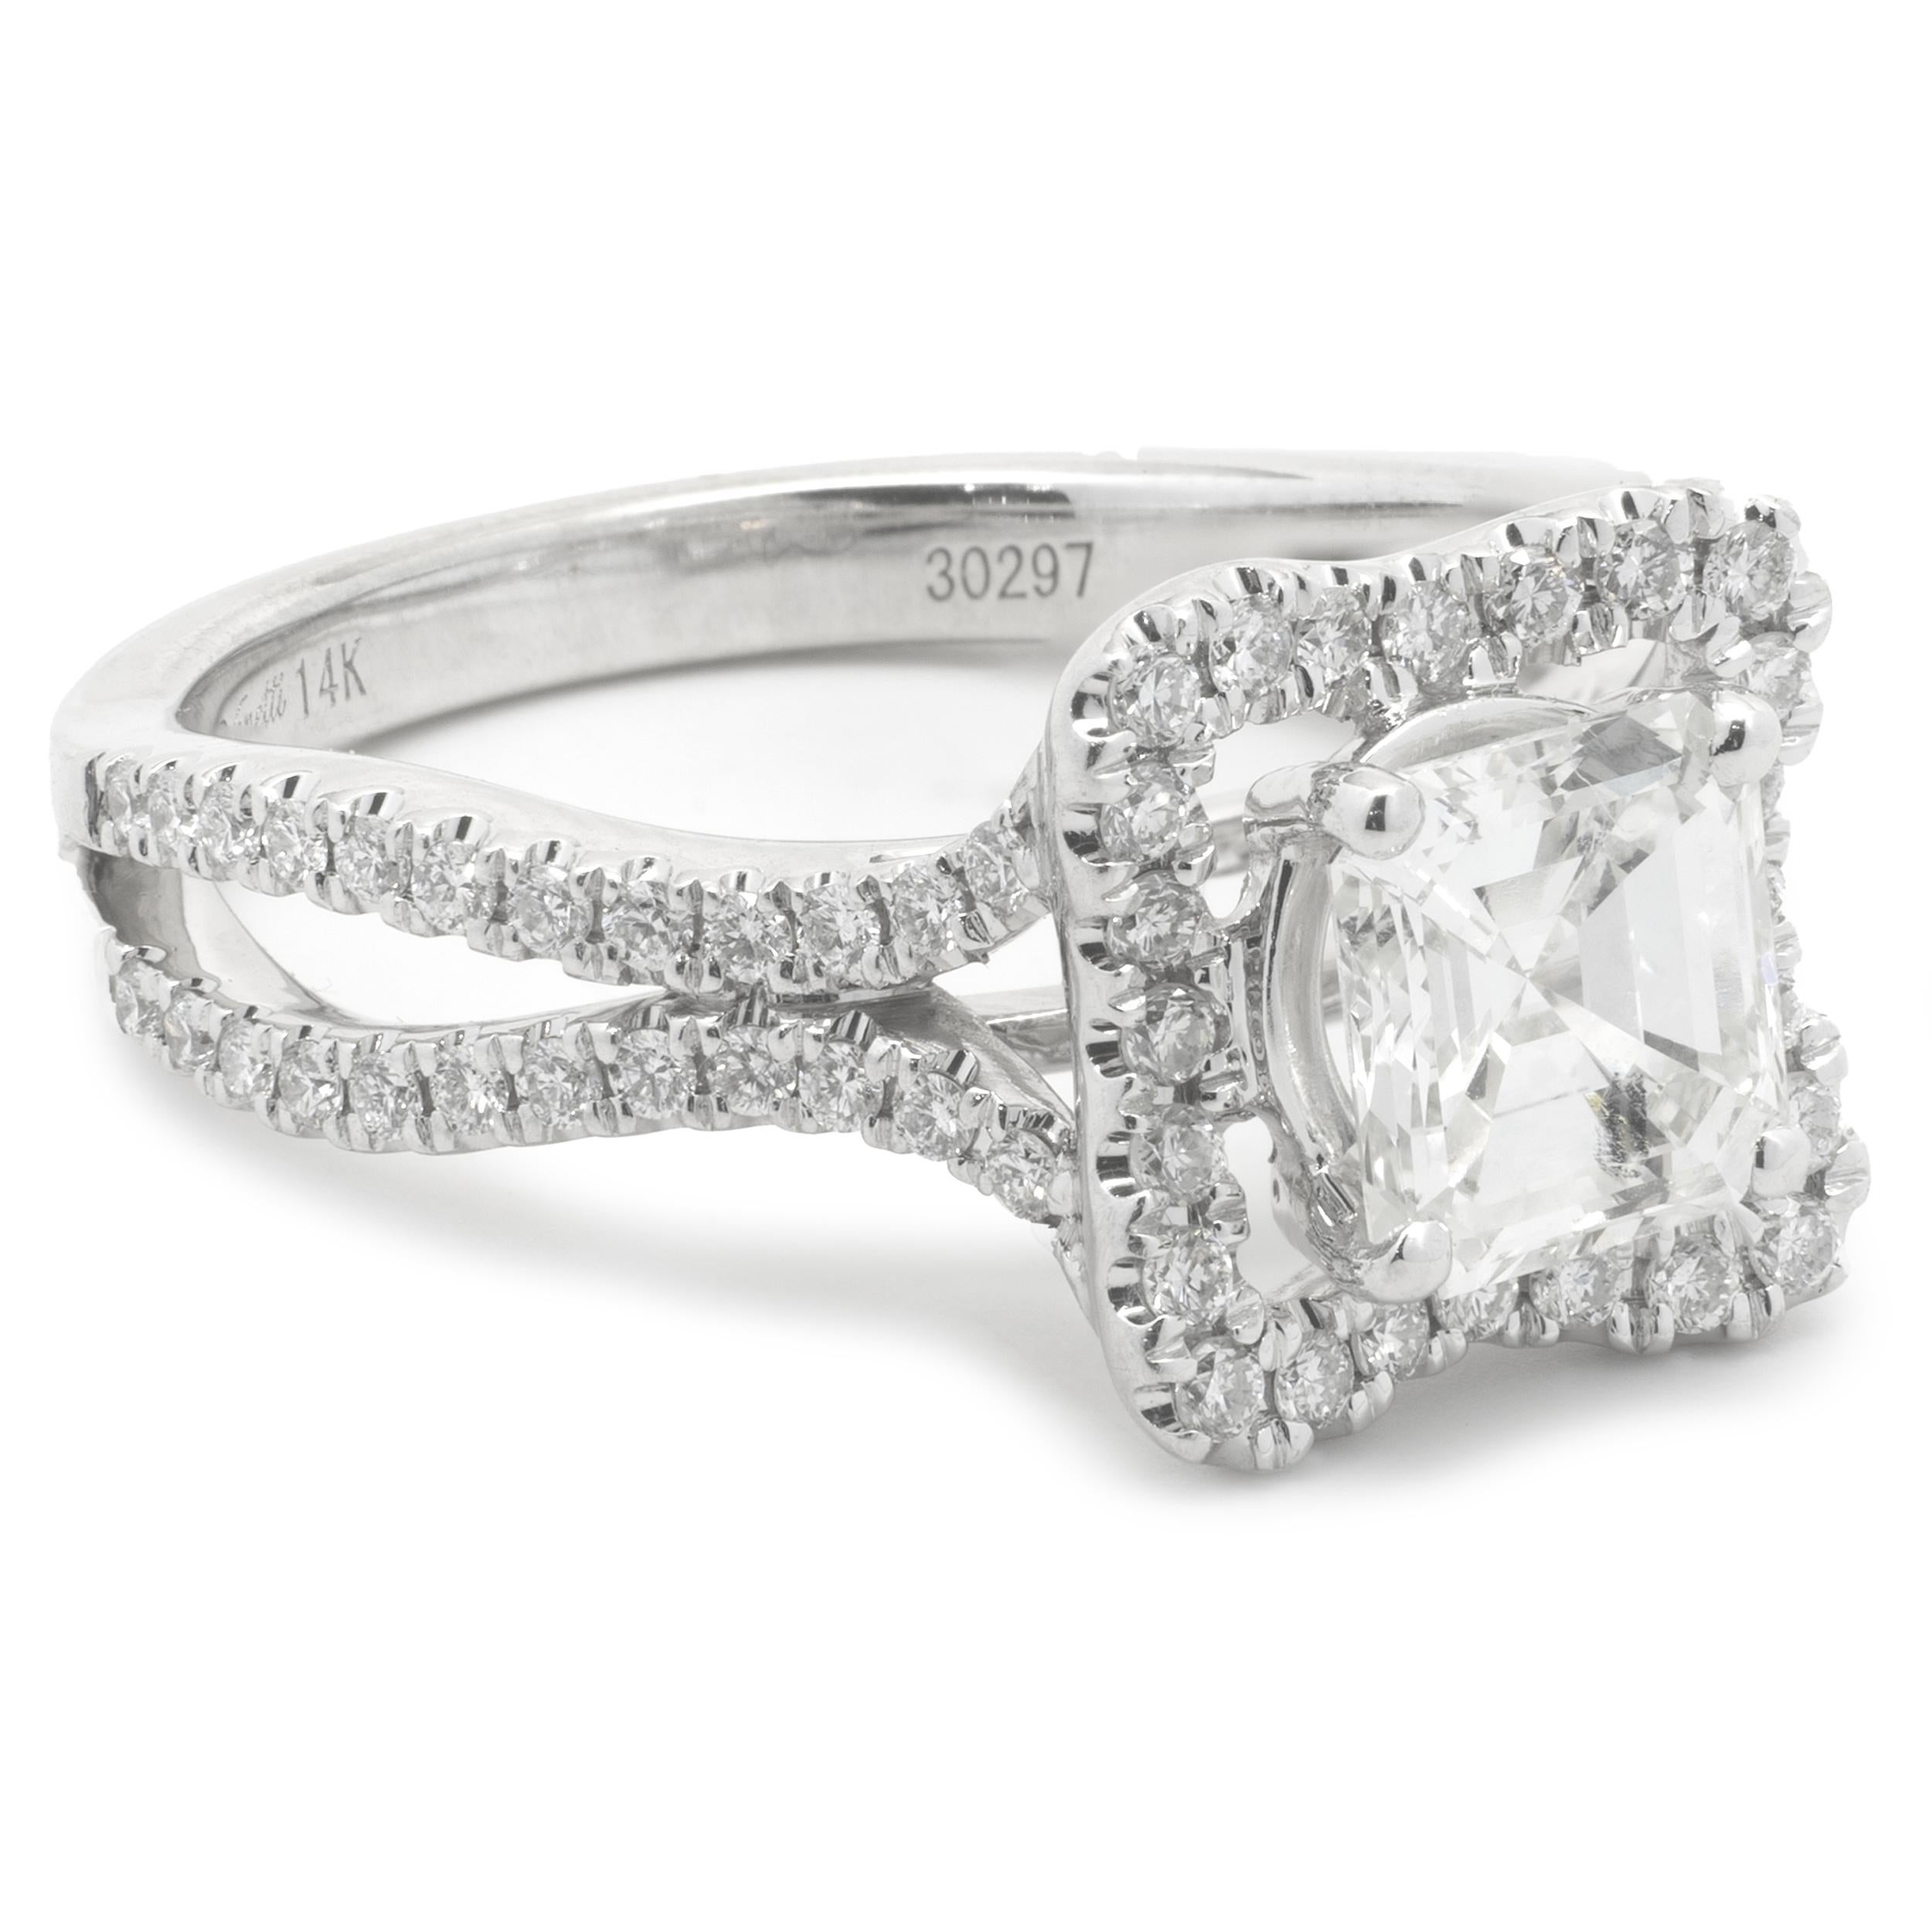 Designer: custom
Material: 14K white gold 
Diamond: 1 asscher cut = 1.10ct
Color: I
Clarity: VS1
Diamond: 72 round brilliant cut = .75cttw
Color:  G
Clarity: VS1-2
Ring Size: 6.5 (please allow up to 2 additional business days for sizing